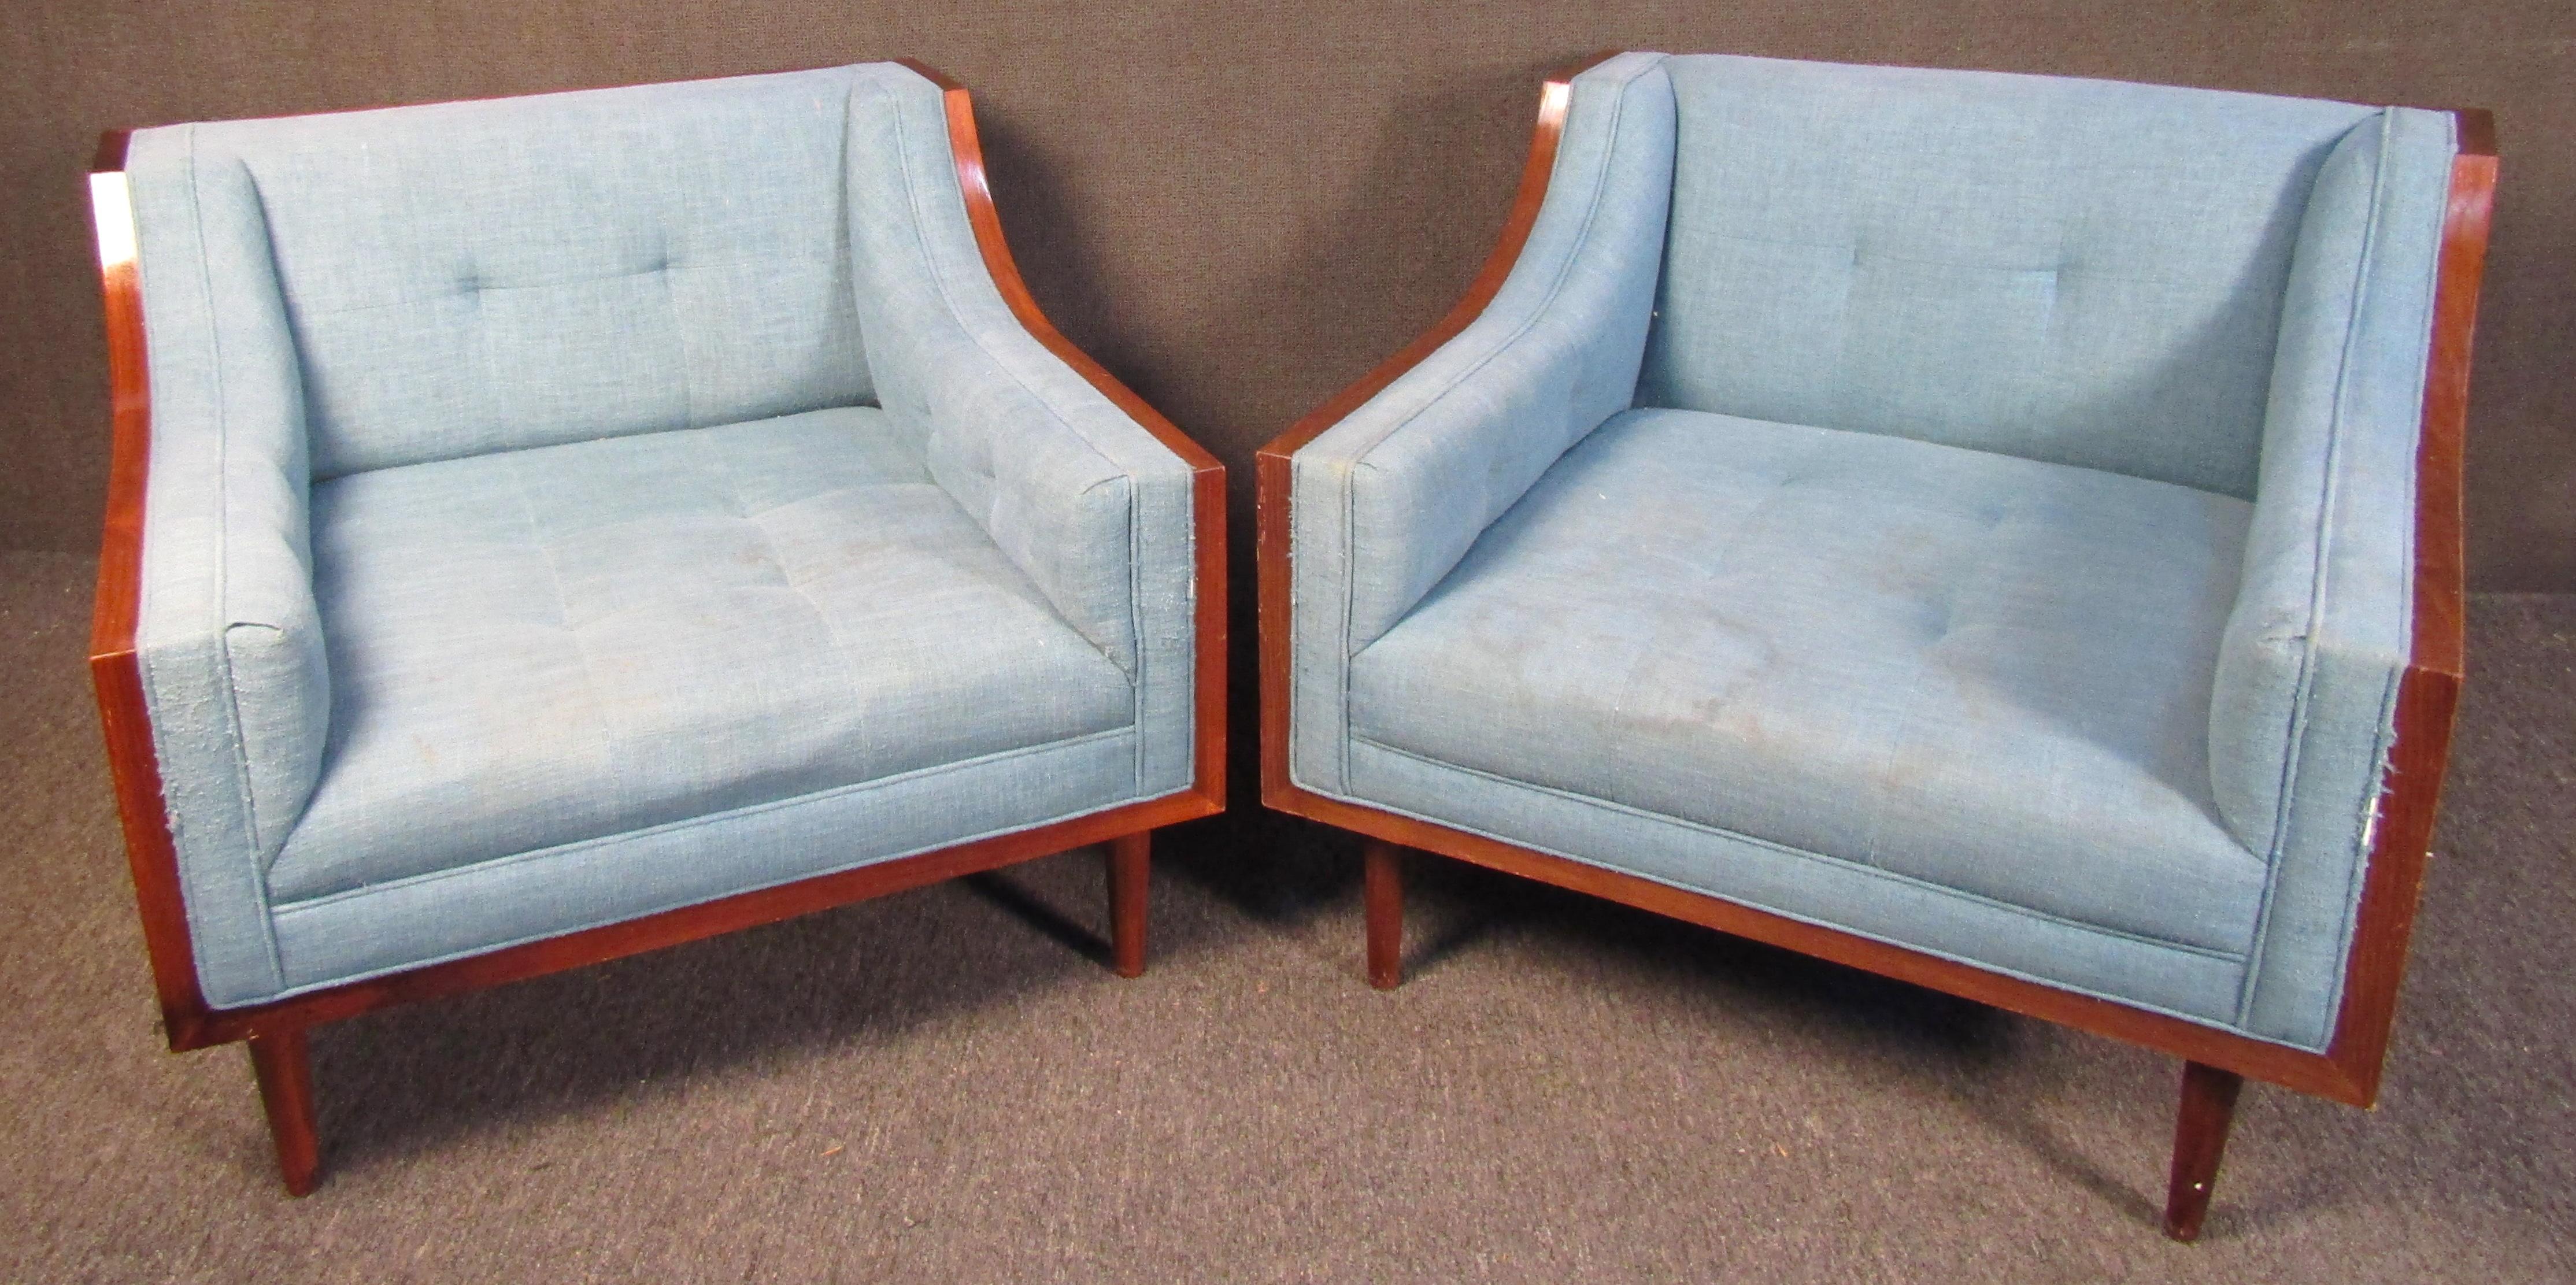 Elegant Mid-Century Modern Wood and Blue Fabric Lounge Chairs In Good Condition For Sale In Brooklyn, NY